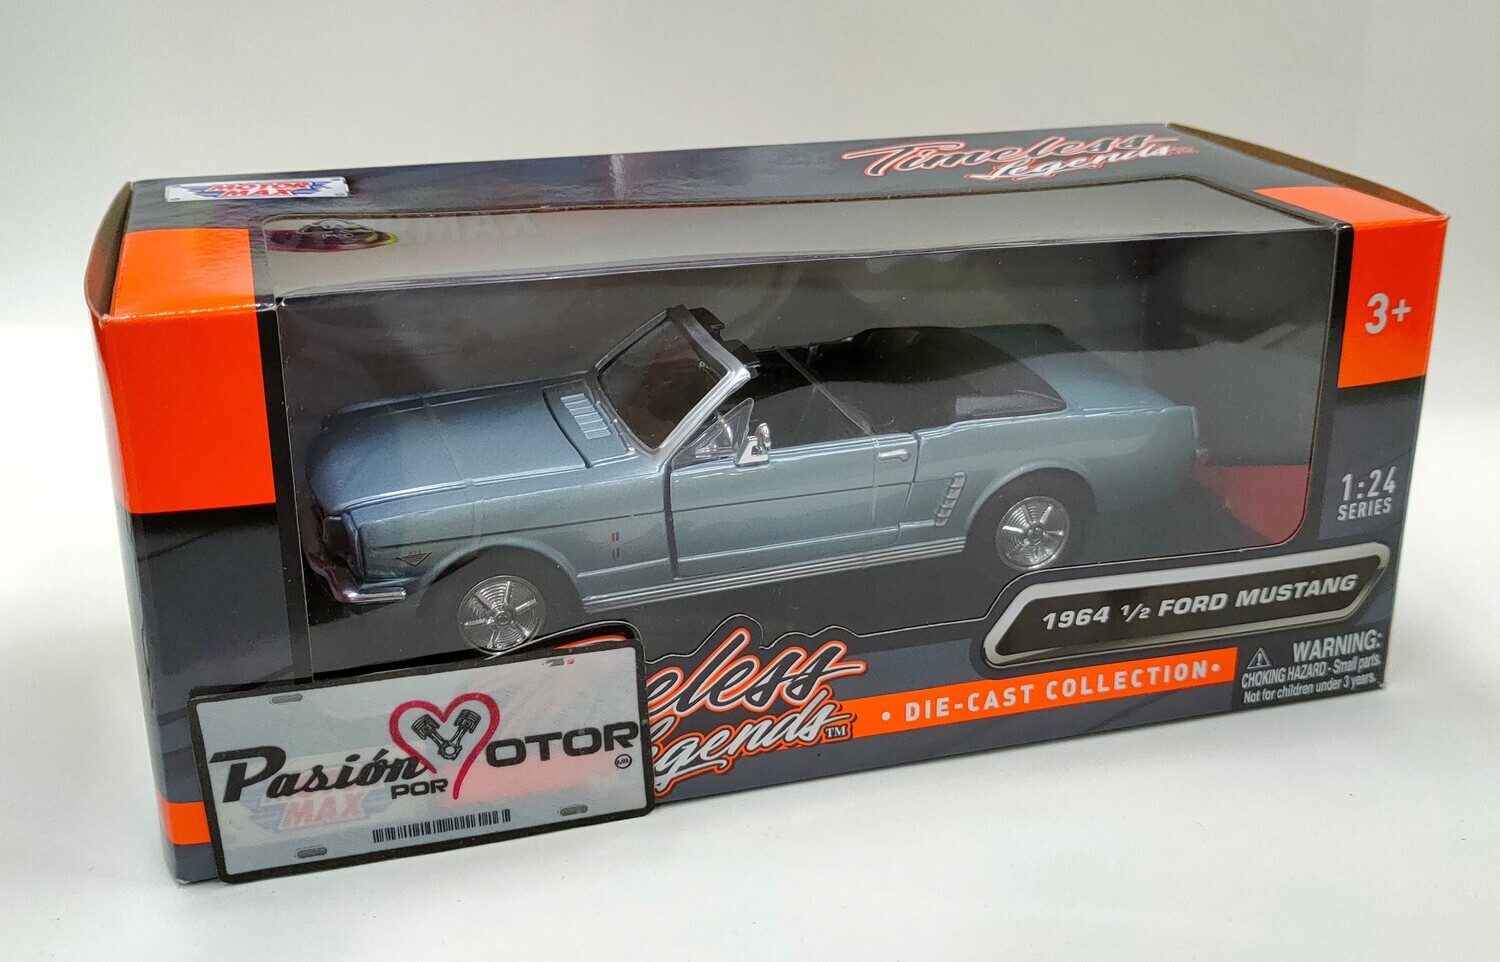 Motor Max 1:24 Ford Mustang Convertible 1964 1/2 Azul Timeless Legends Con Caja Shelby